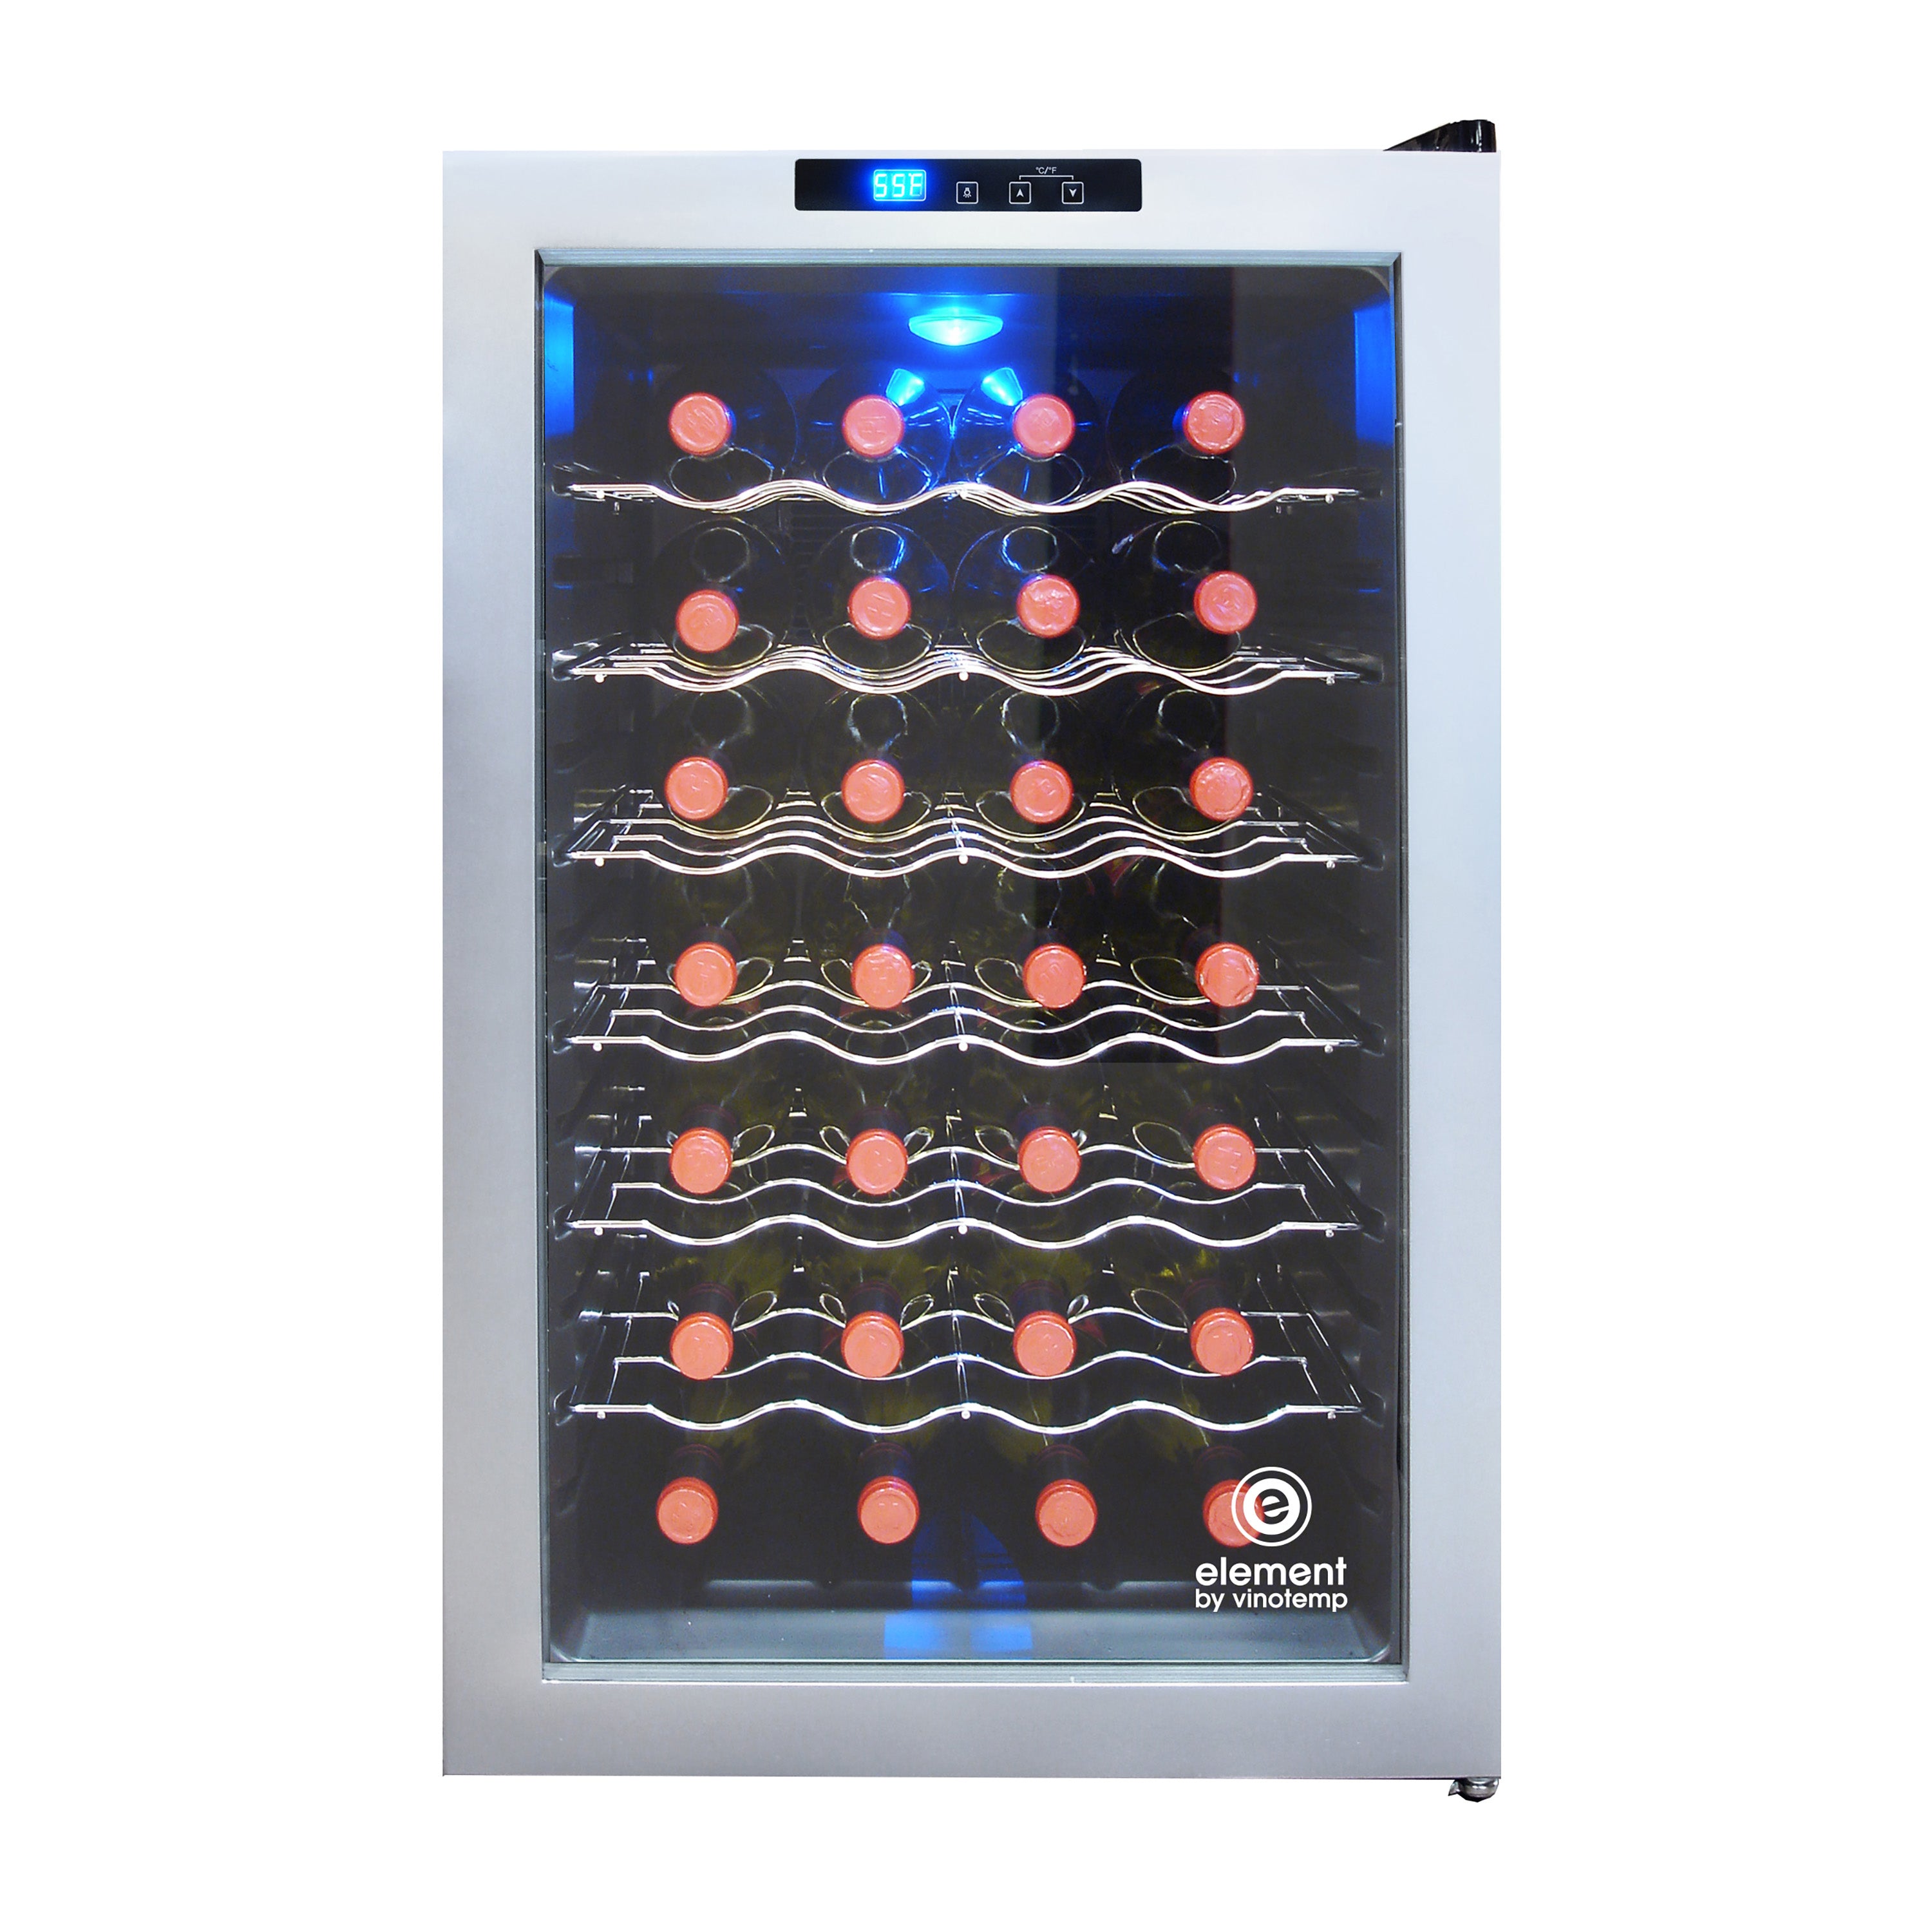 Vinotemp - EL-28SILC, Vinotemp Butler Series Wine Cooler with Touch Screen Controls, 28 Bottle Capacity, in Silver